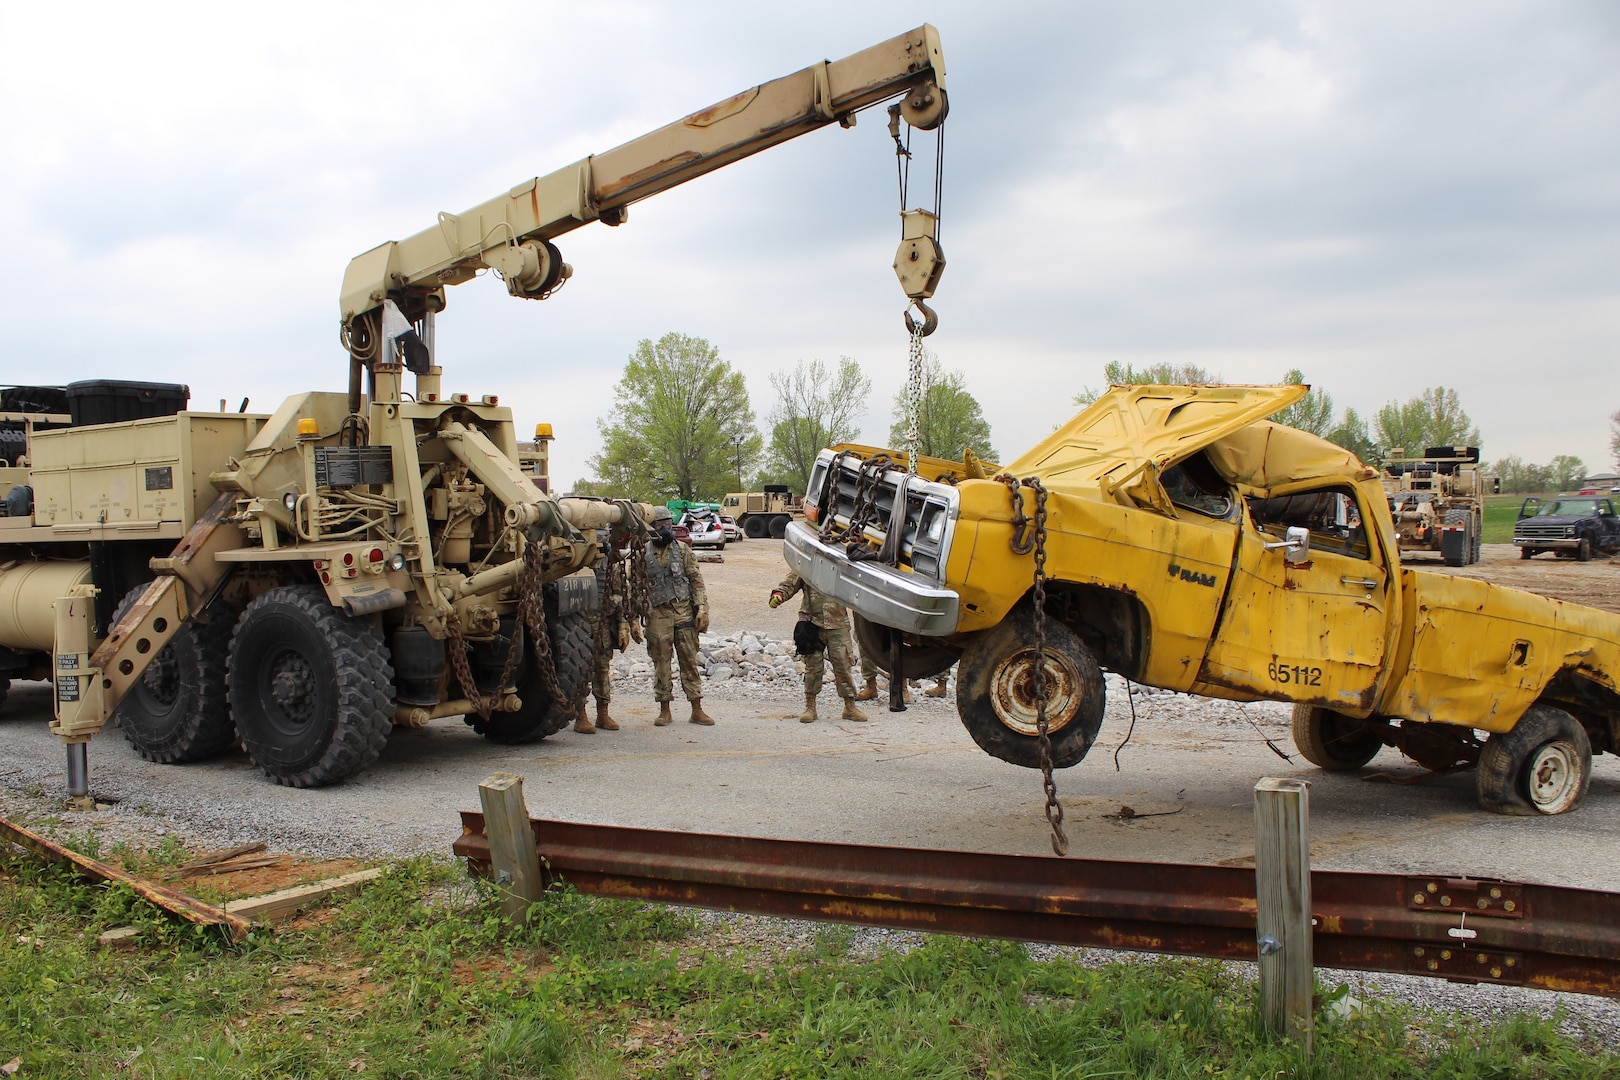 Soldiers from 104th Engineer Construction Company, Task Force Ops, Joint Task Force Civil Support (JTFCS), move damaged vehicles from a road to clear the way for search and rescue teams during Exercise Guardian Response at Muscatatuck, Ind., 30 April, 2019. When directed, JTFCS provides command and control of the 5,200-person Defense Chemical Biological Radiological Nuclear(CBRN) Response Force (DCRF) during a catastrophic crisis in support of civil authorities and the lead federal agency. Vibrant Response/Guardian Response is an annual, combined Command Post Exercise and Field Training Exercise which validates the ability of the DCRF forces to conduct the CBRN Response mission. (U.S. Army photo by 2nd Lt. Corey Maisch/released)